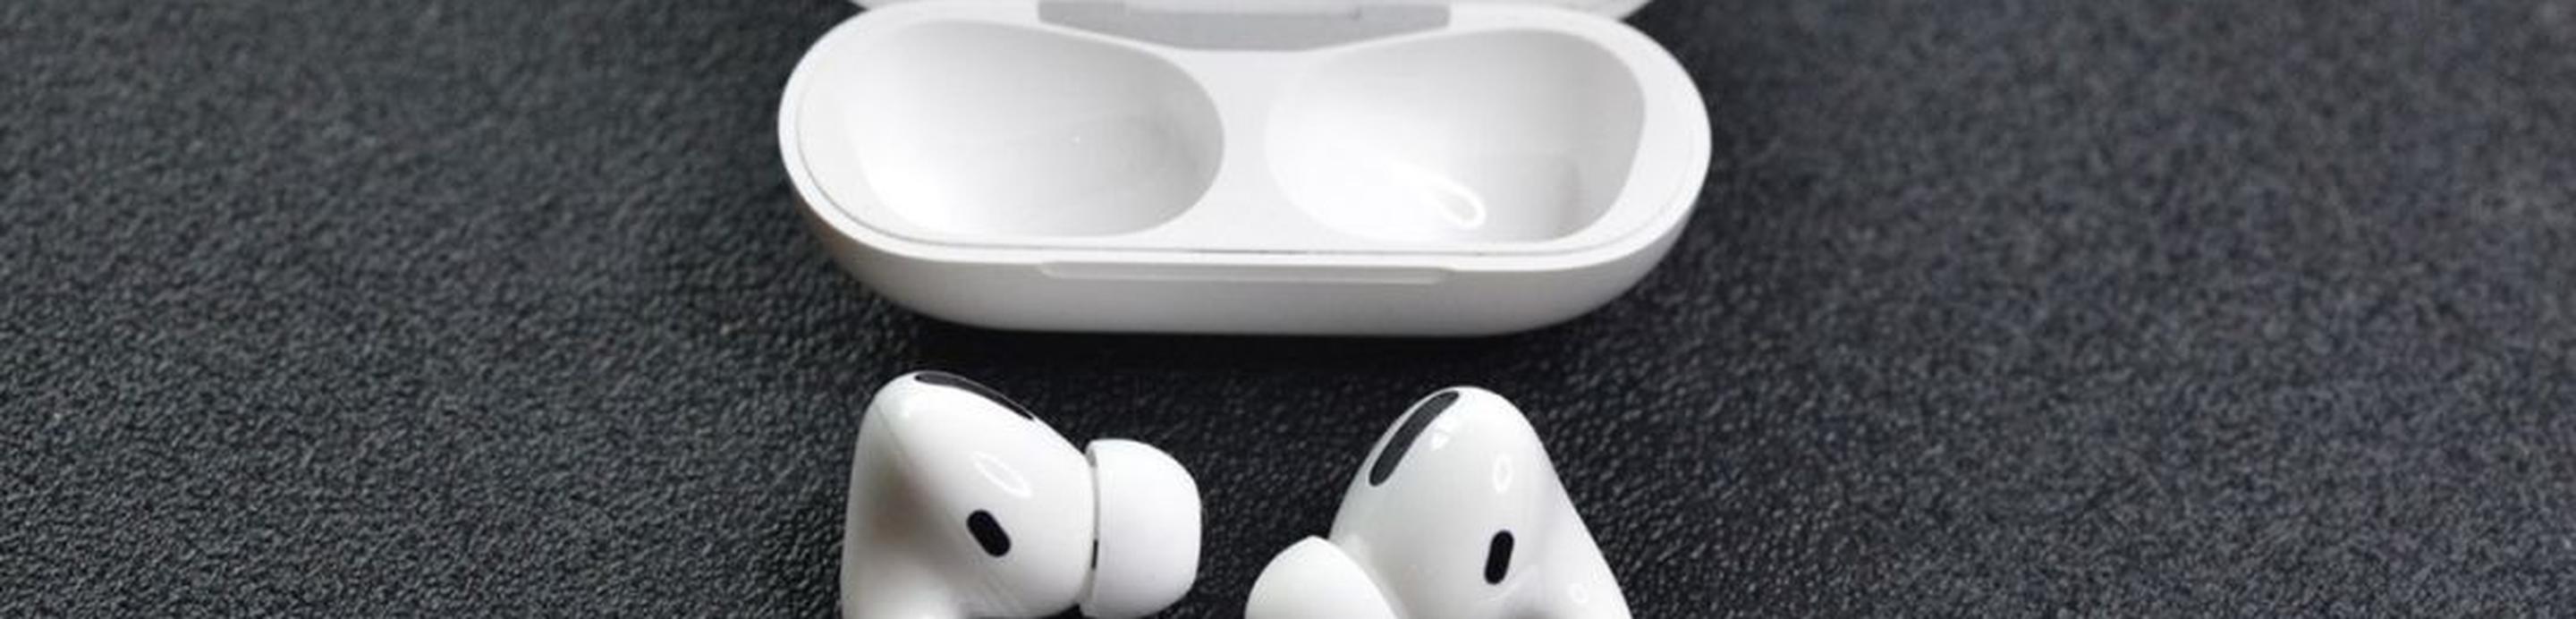 airpods 3 test